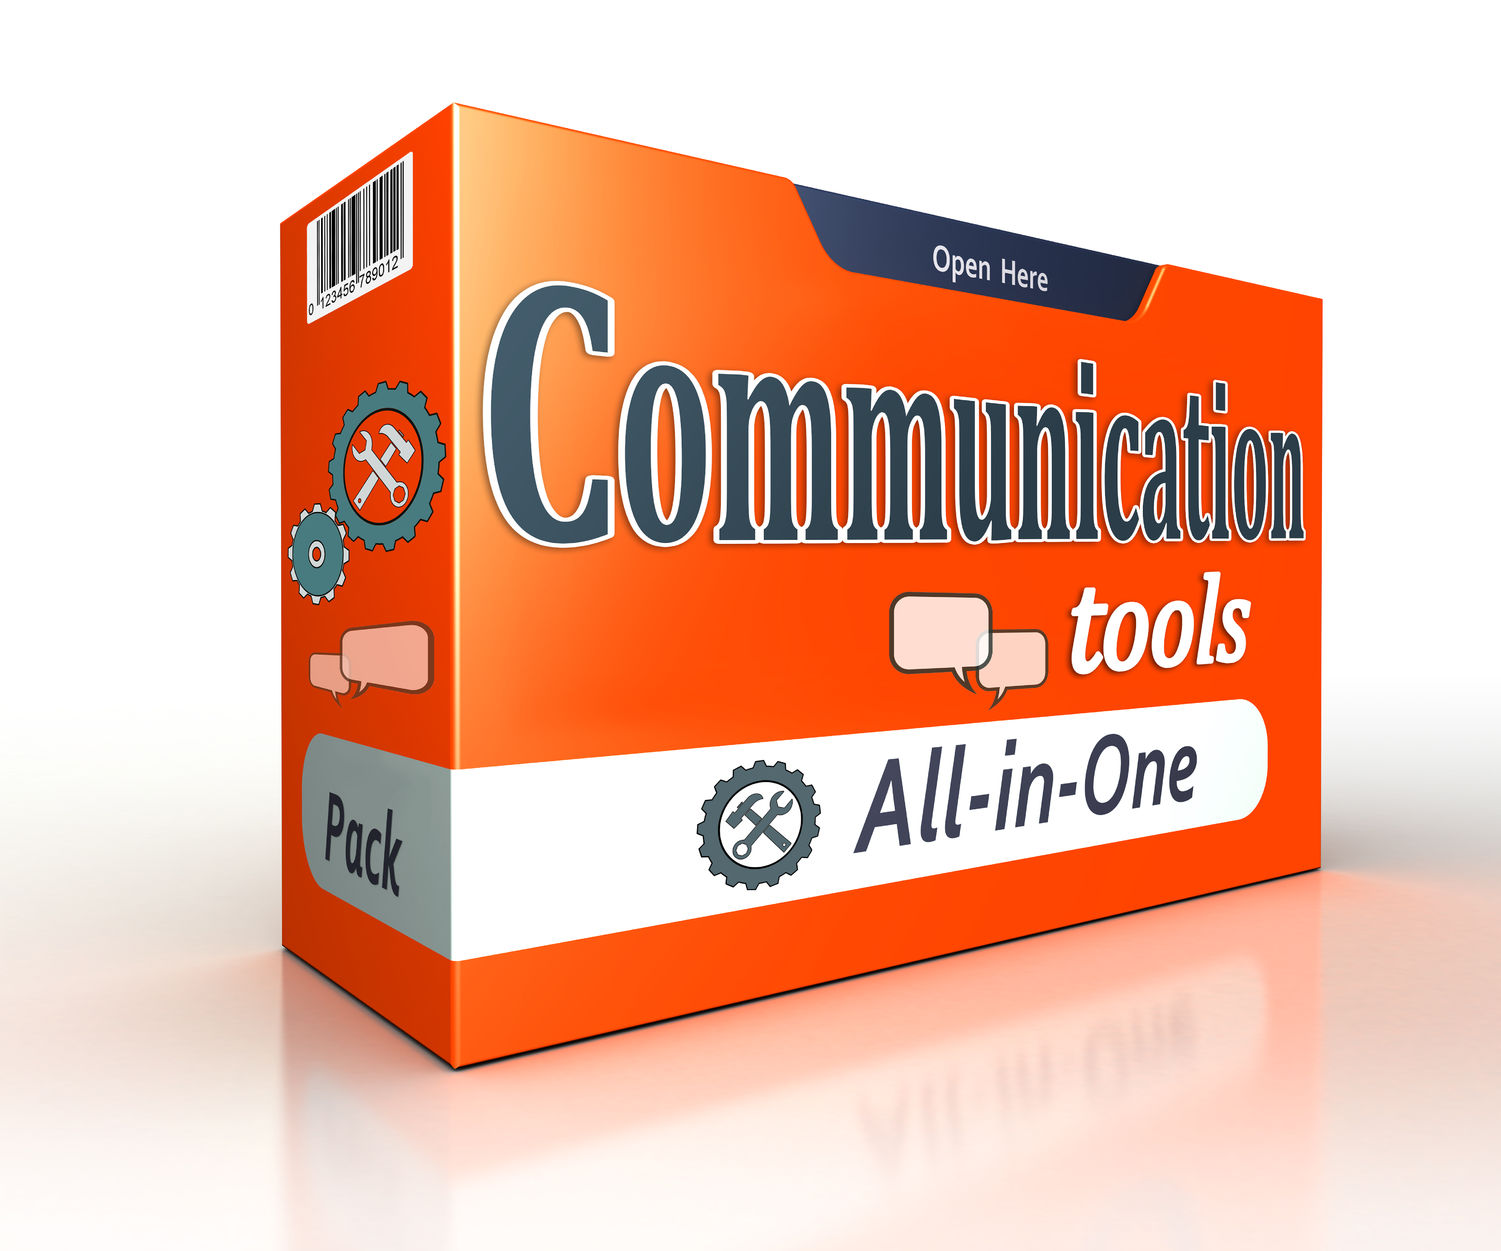 47422109 - communication tools orange pack concept on white background. clipping path included